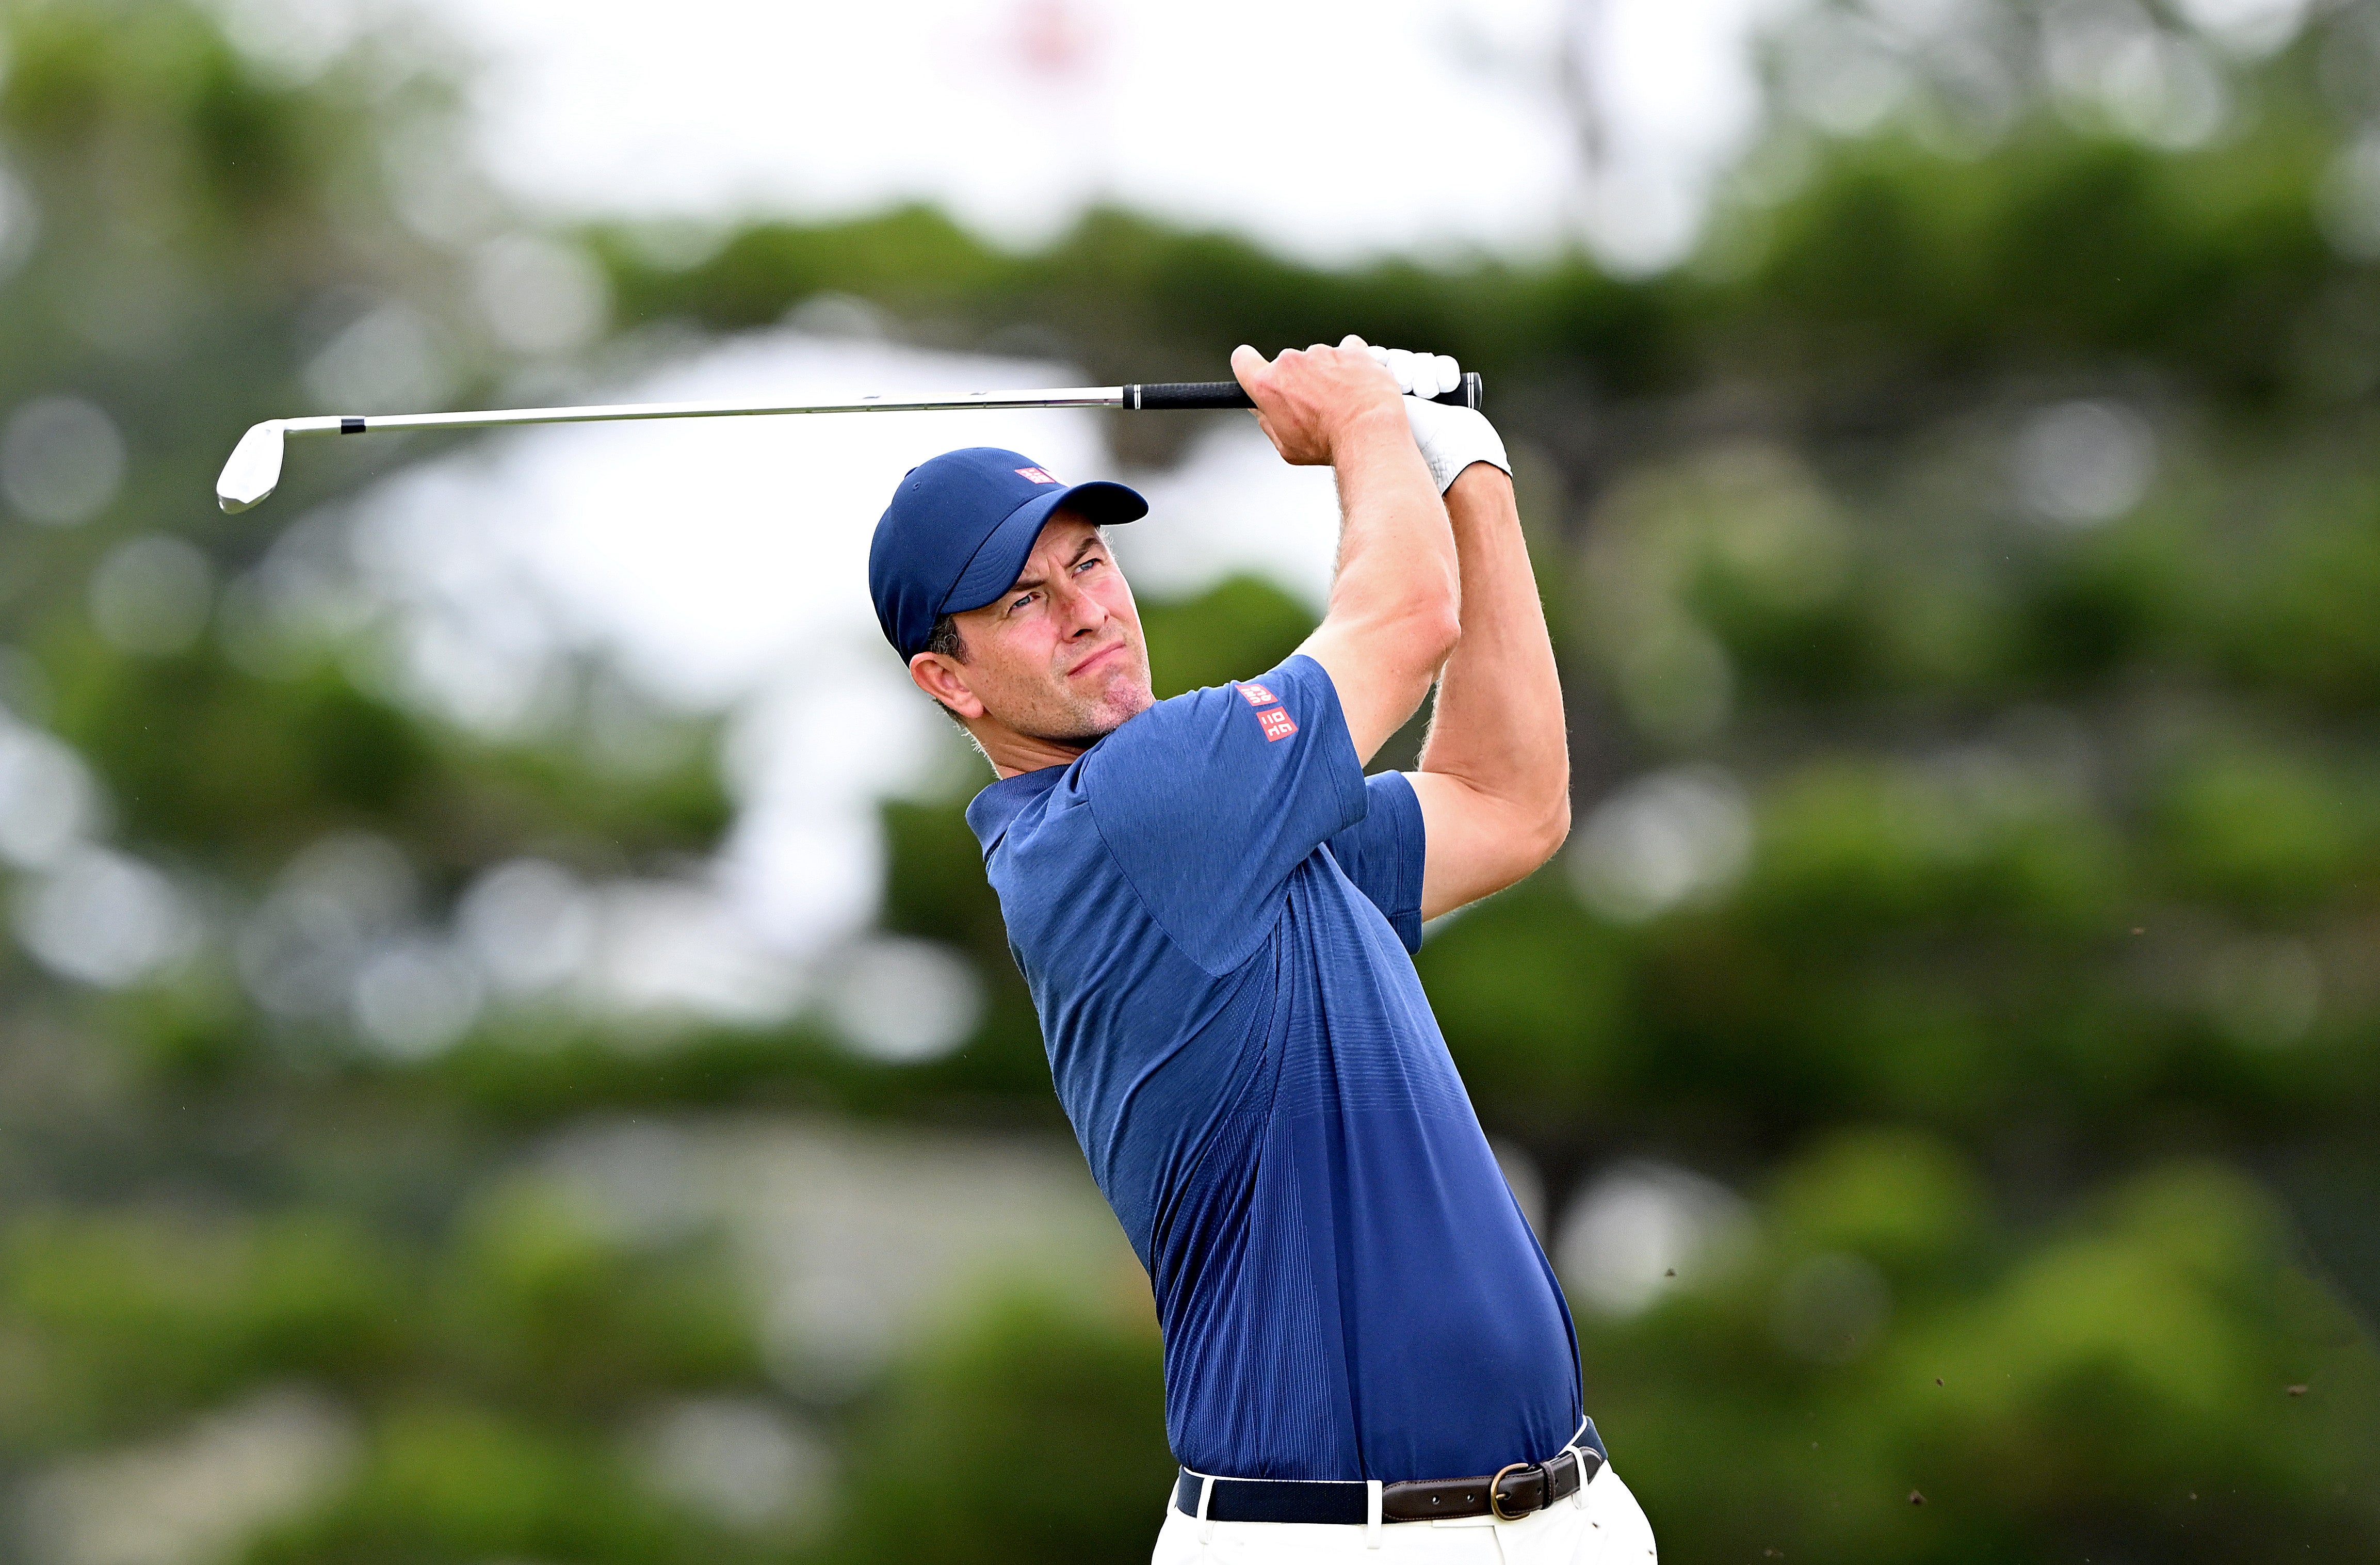 Adam Scott played in a Pro-Am event in Brisbane as practice for the Australian PGA Championship